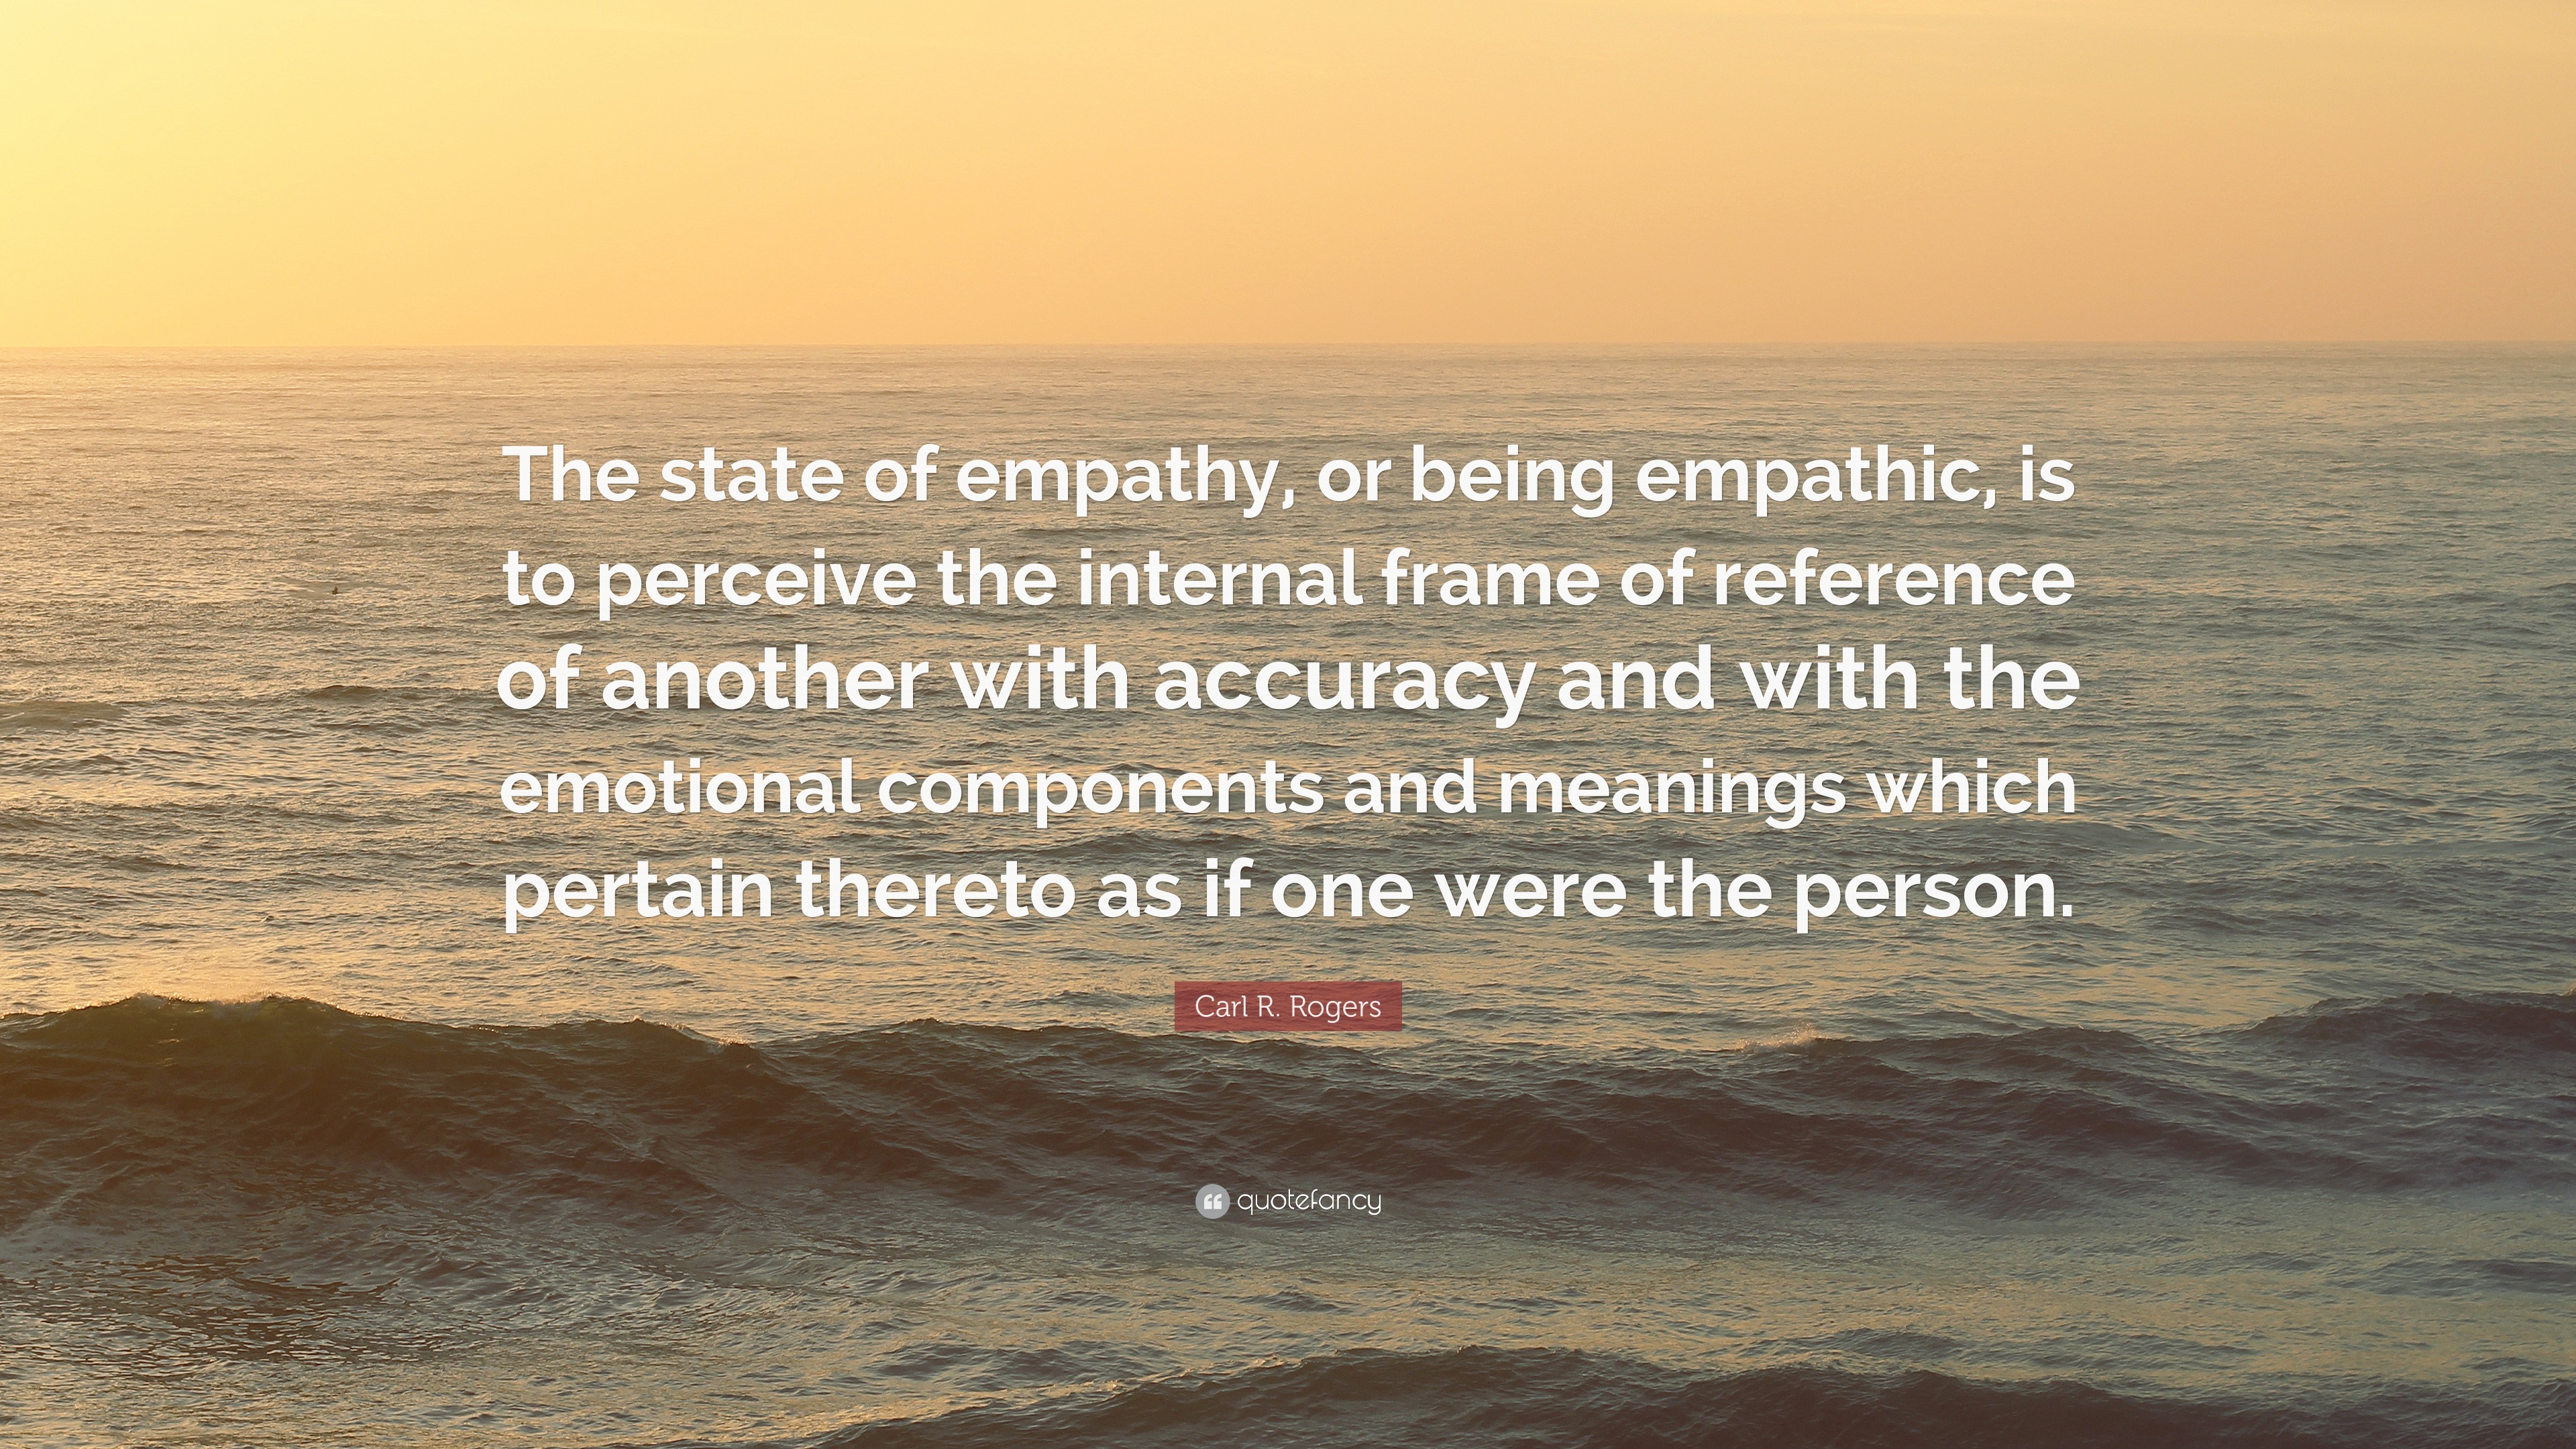 Carl R Rogers Quote The State Of Empathy Or Being Empathic Is To Perceive The Internal Frame Of Reference Of Another With Accuracy And Wit